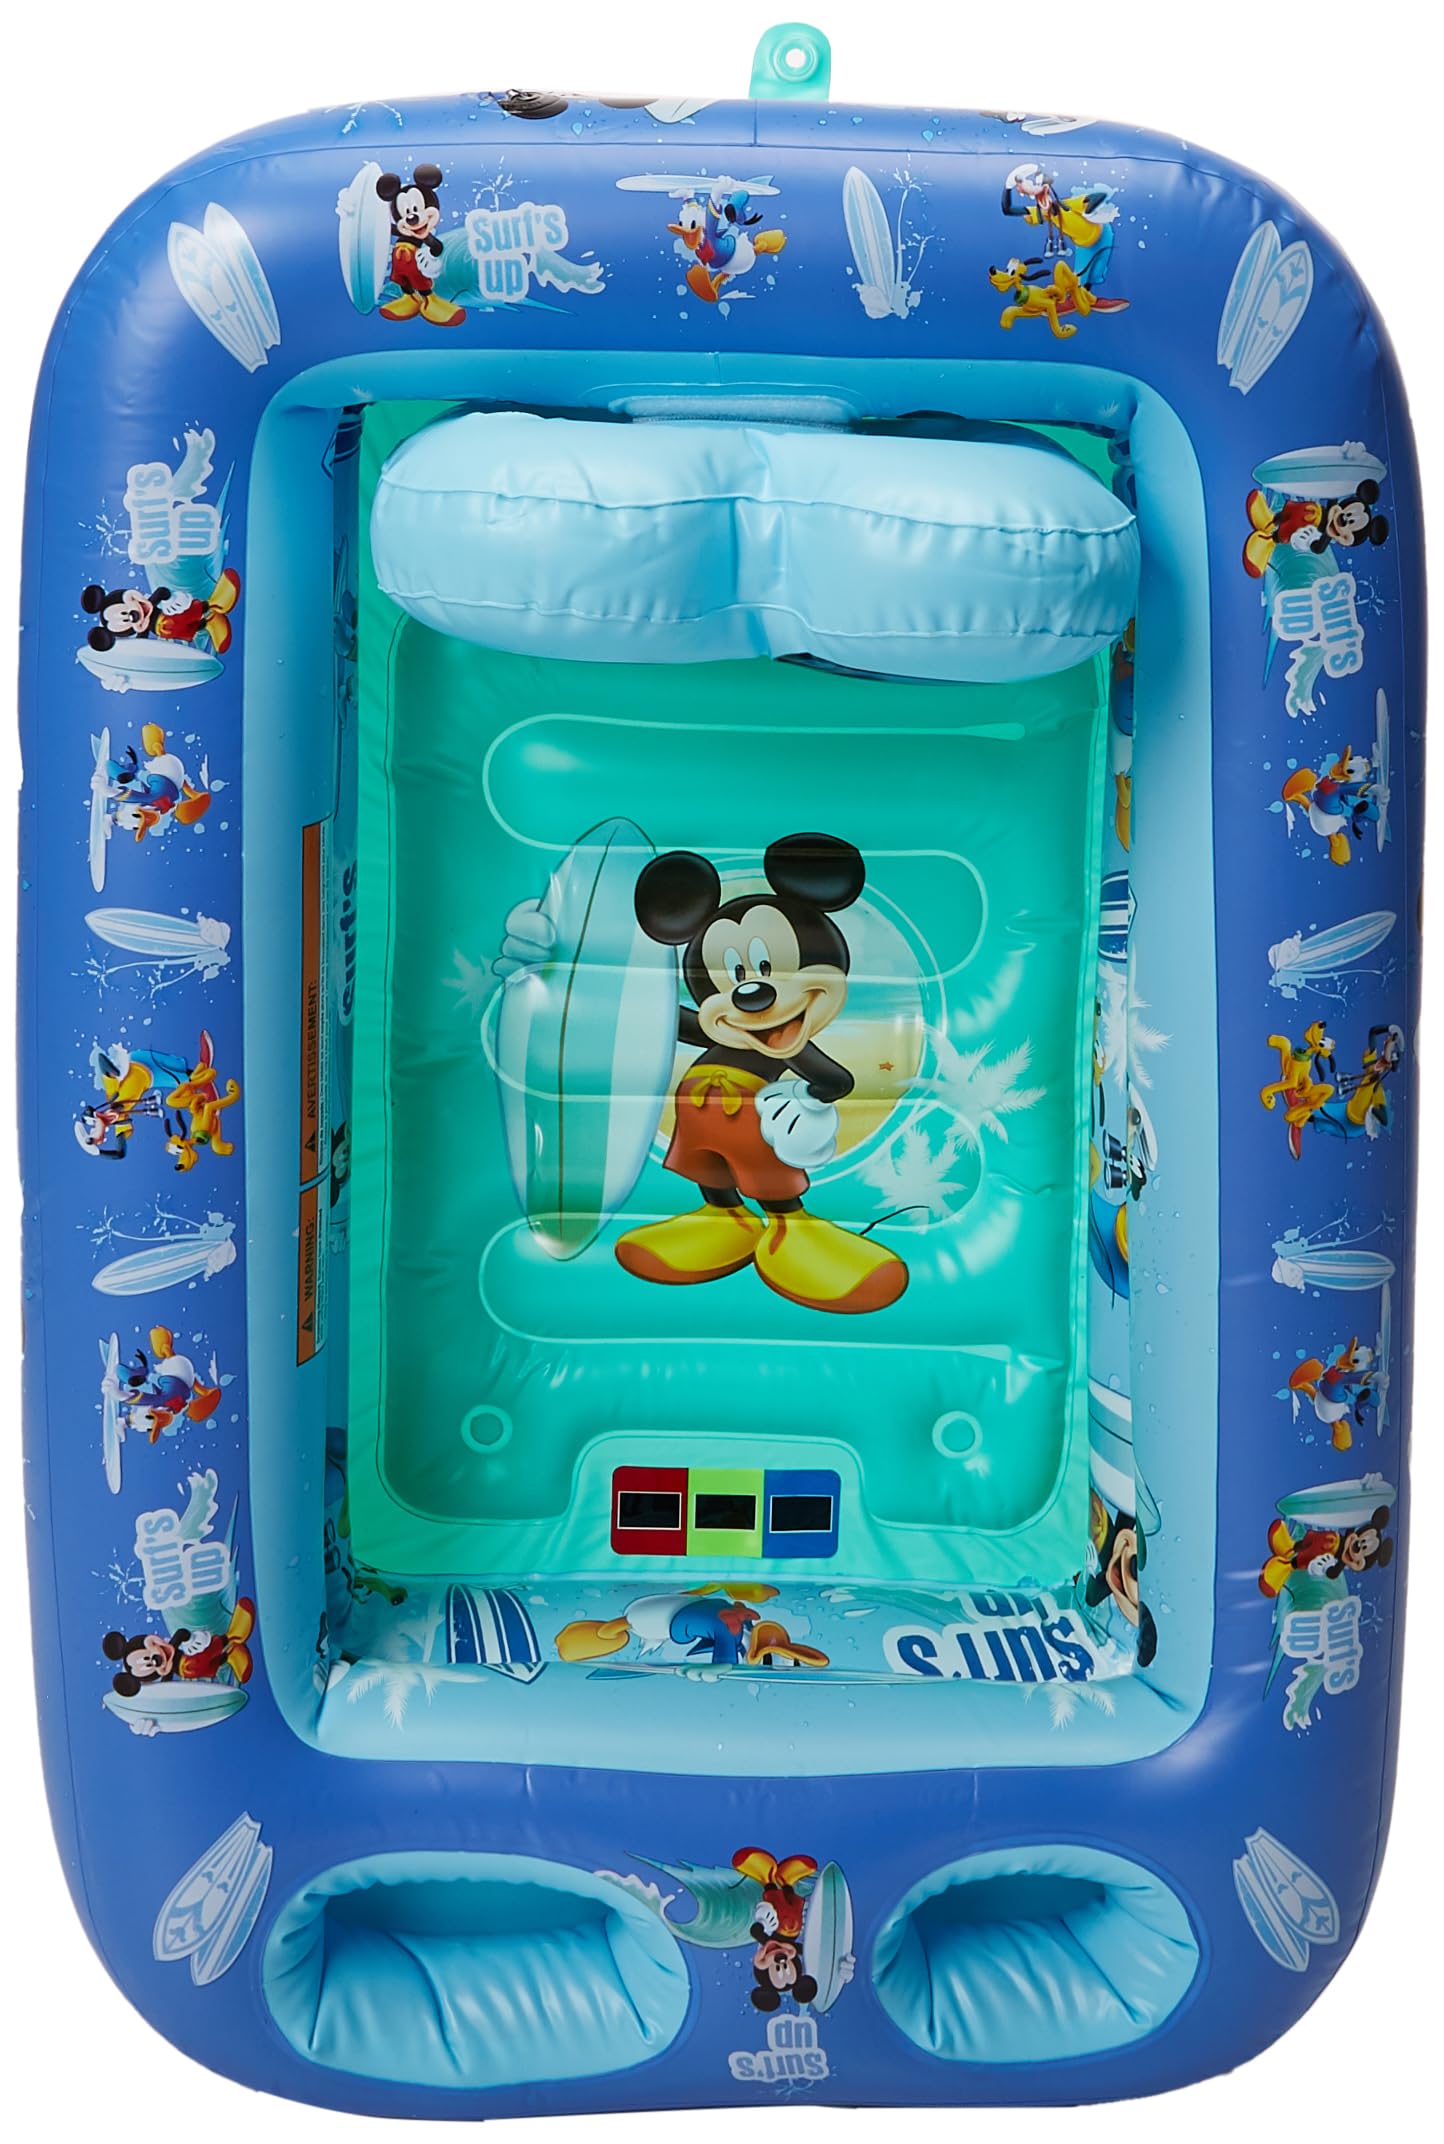 Disney Mickey Mouse Air-Filled Cushion Bath Tub - Free-Standing, Blow up, Portable, Inflatable, Safe Bathing, Baby Bathtub, Toddler Bathtub